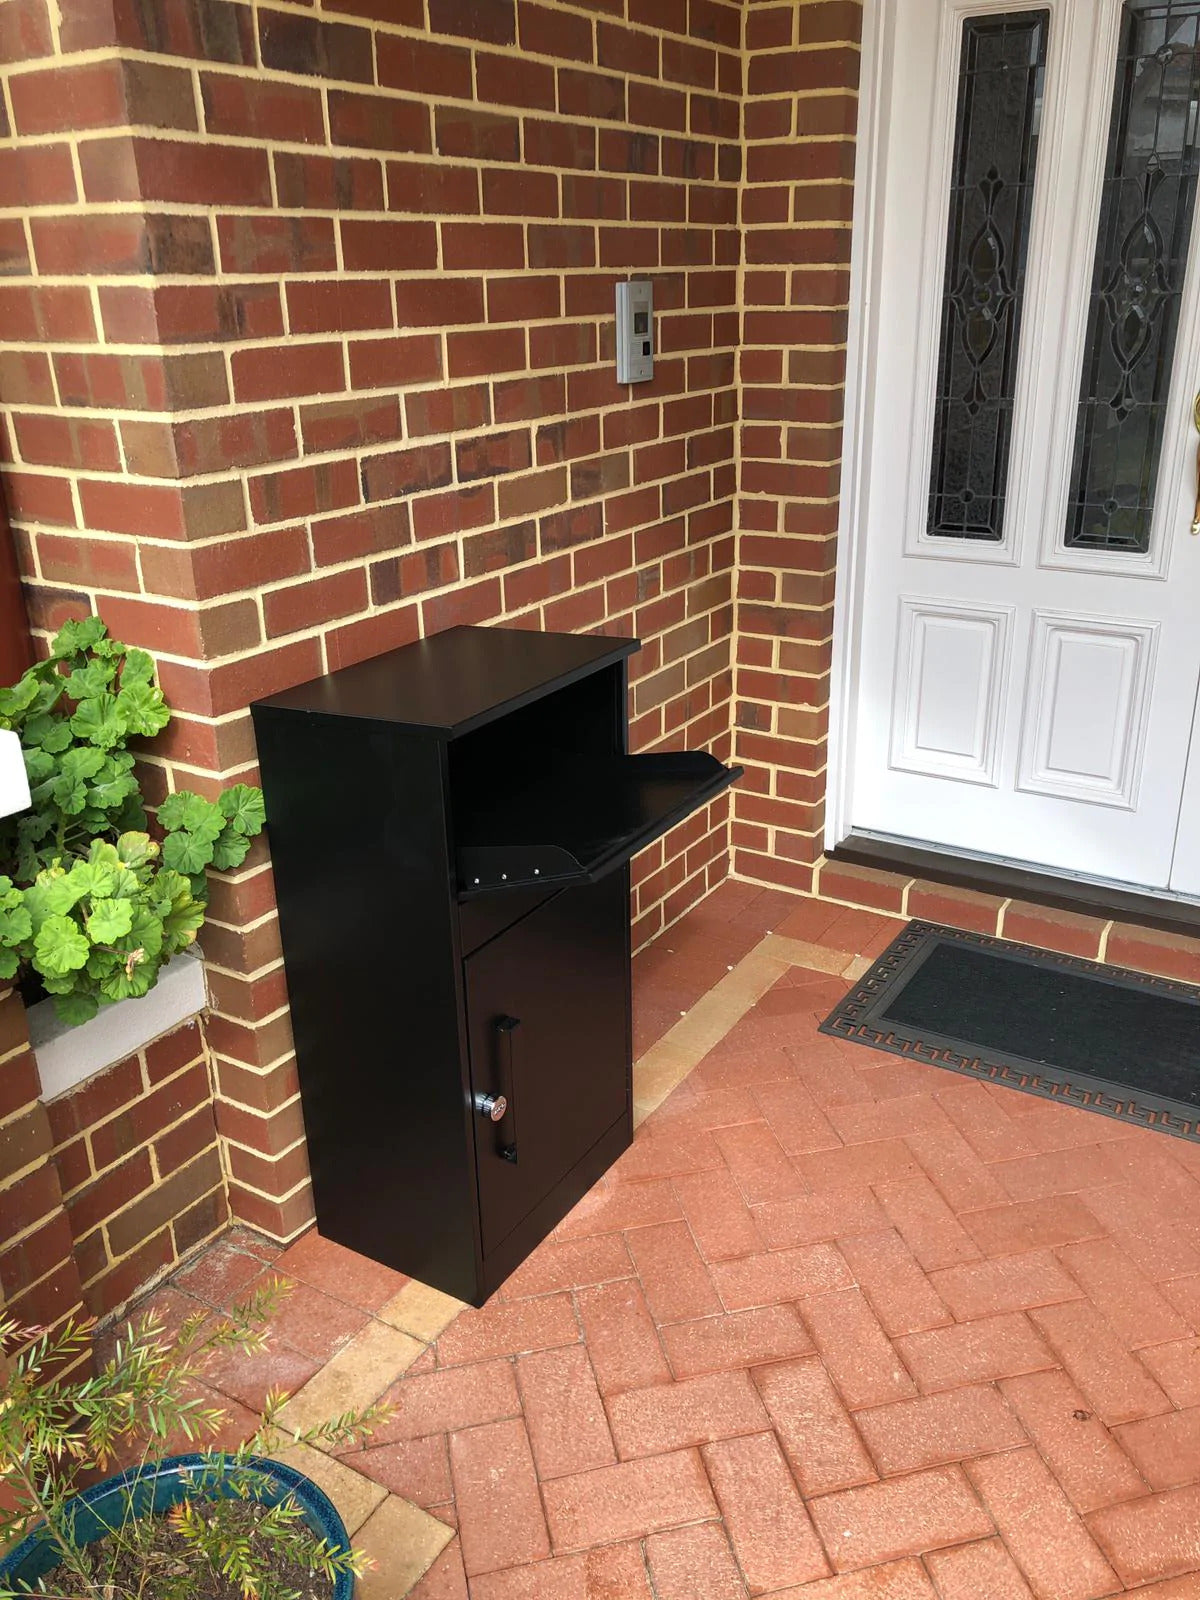 Black Swan Freestanding Large Parcel and Mail Letterbox - Large Parcel Mail Letterbox - black-swan-large-parcel-mail-letterbox - HandyBox